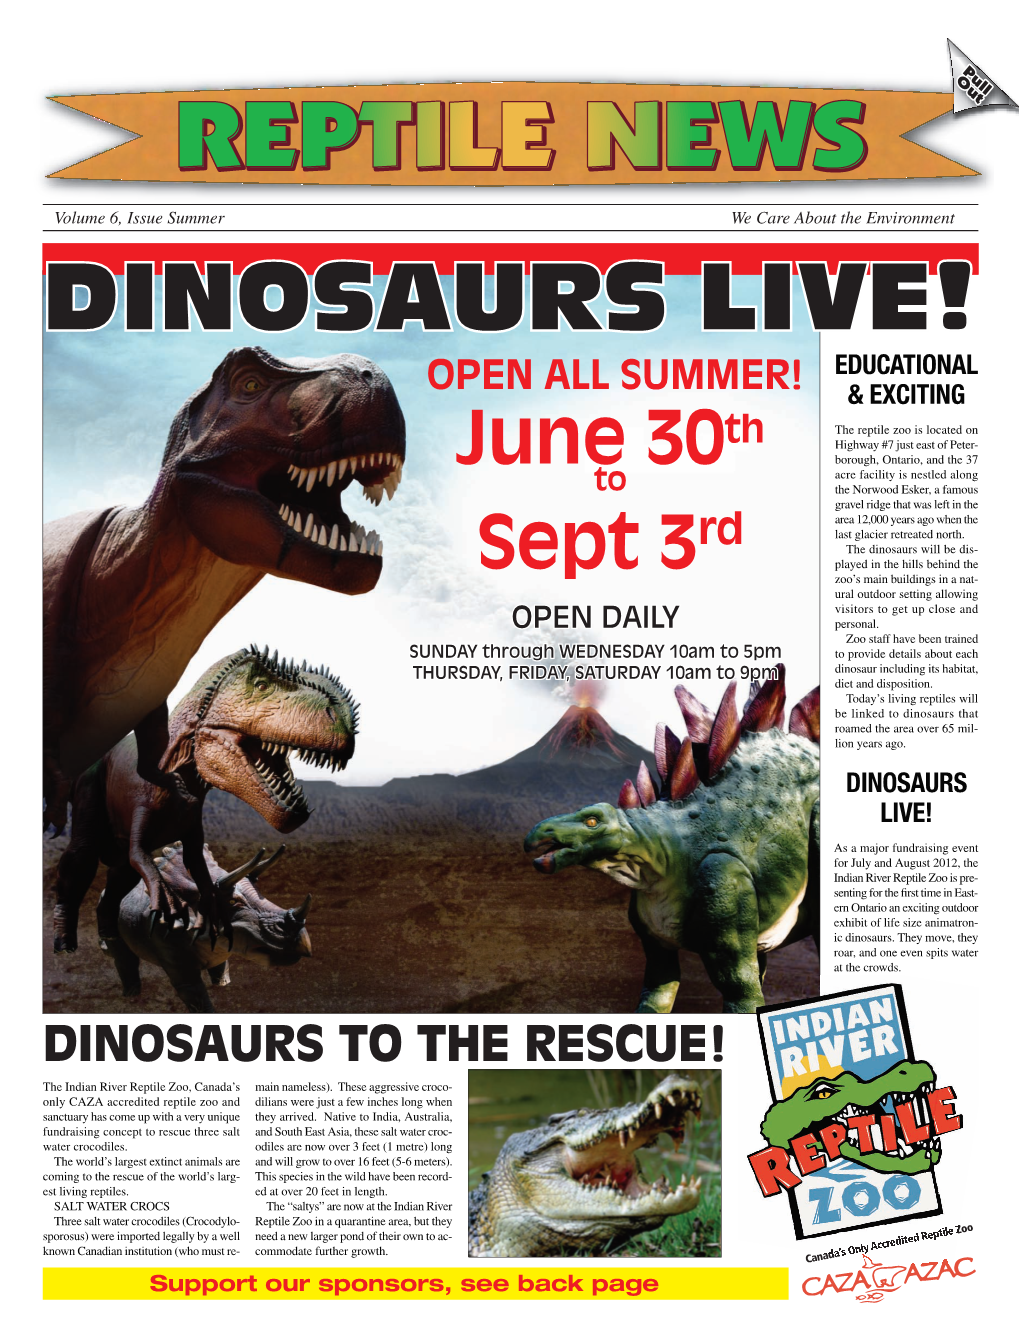 Dinosaurs Live! Educational Open All Summer! & Exciting